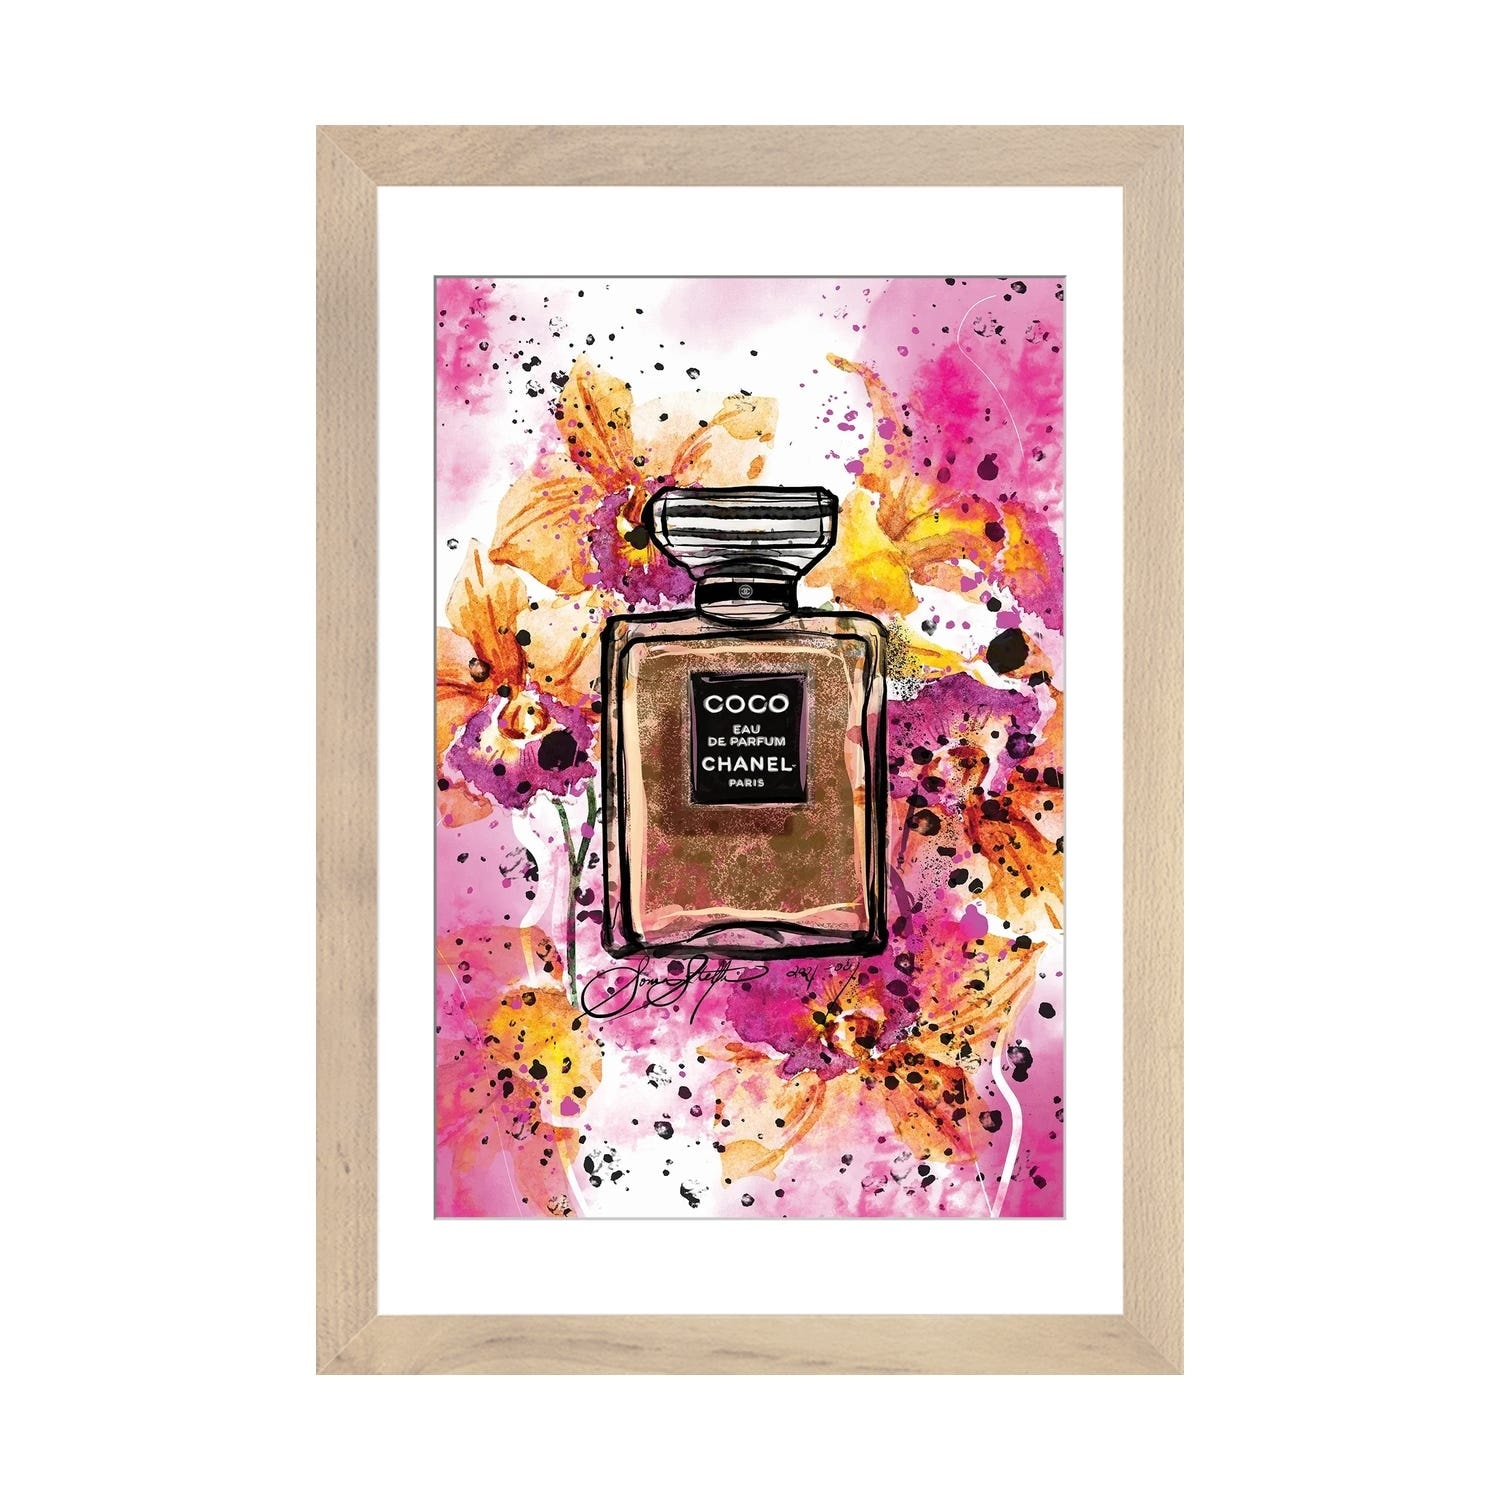 iCanvas Coco Chanel Perfume Bottle Art Watercolor Painting by